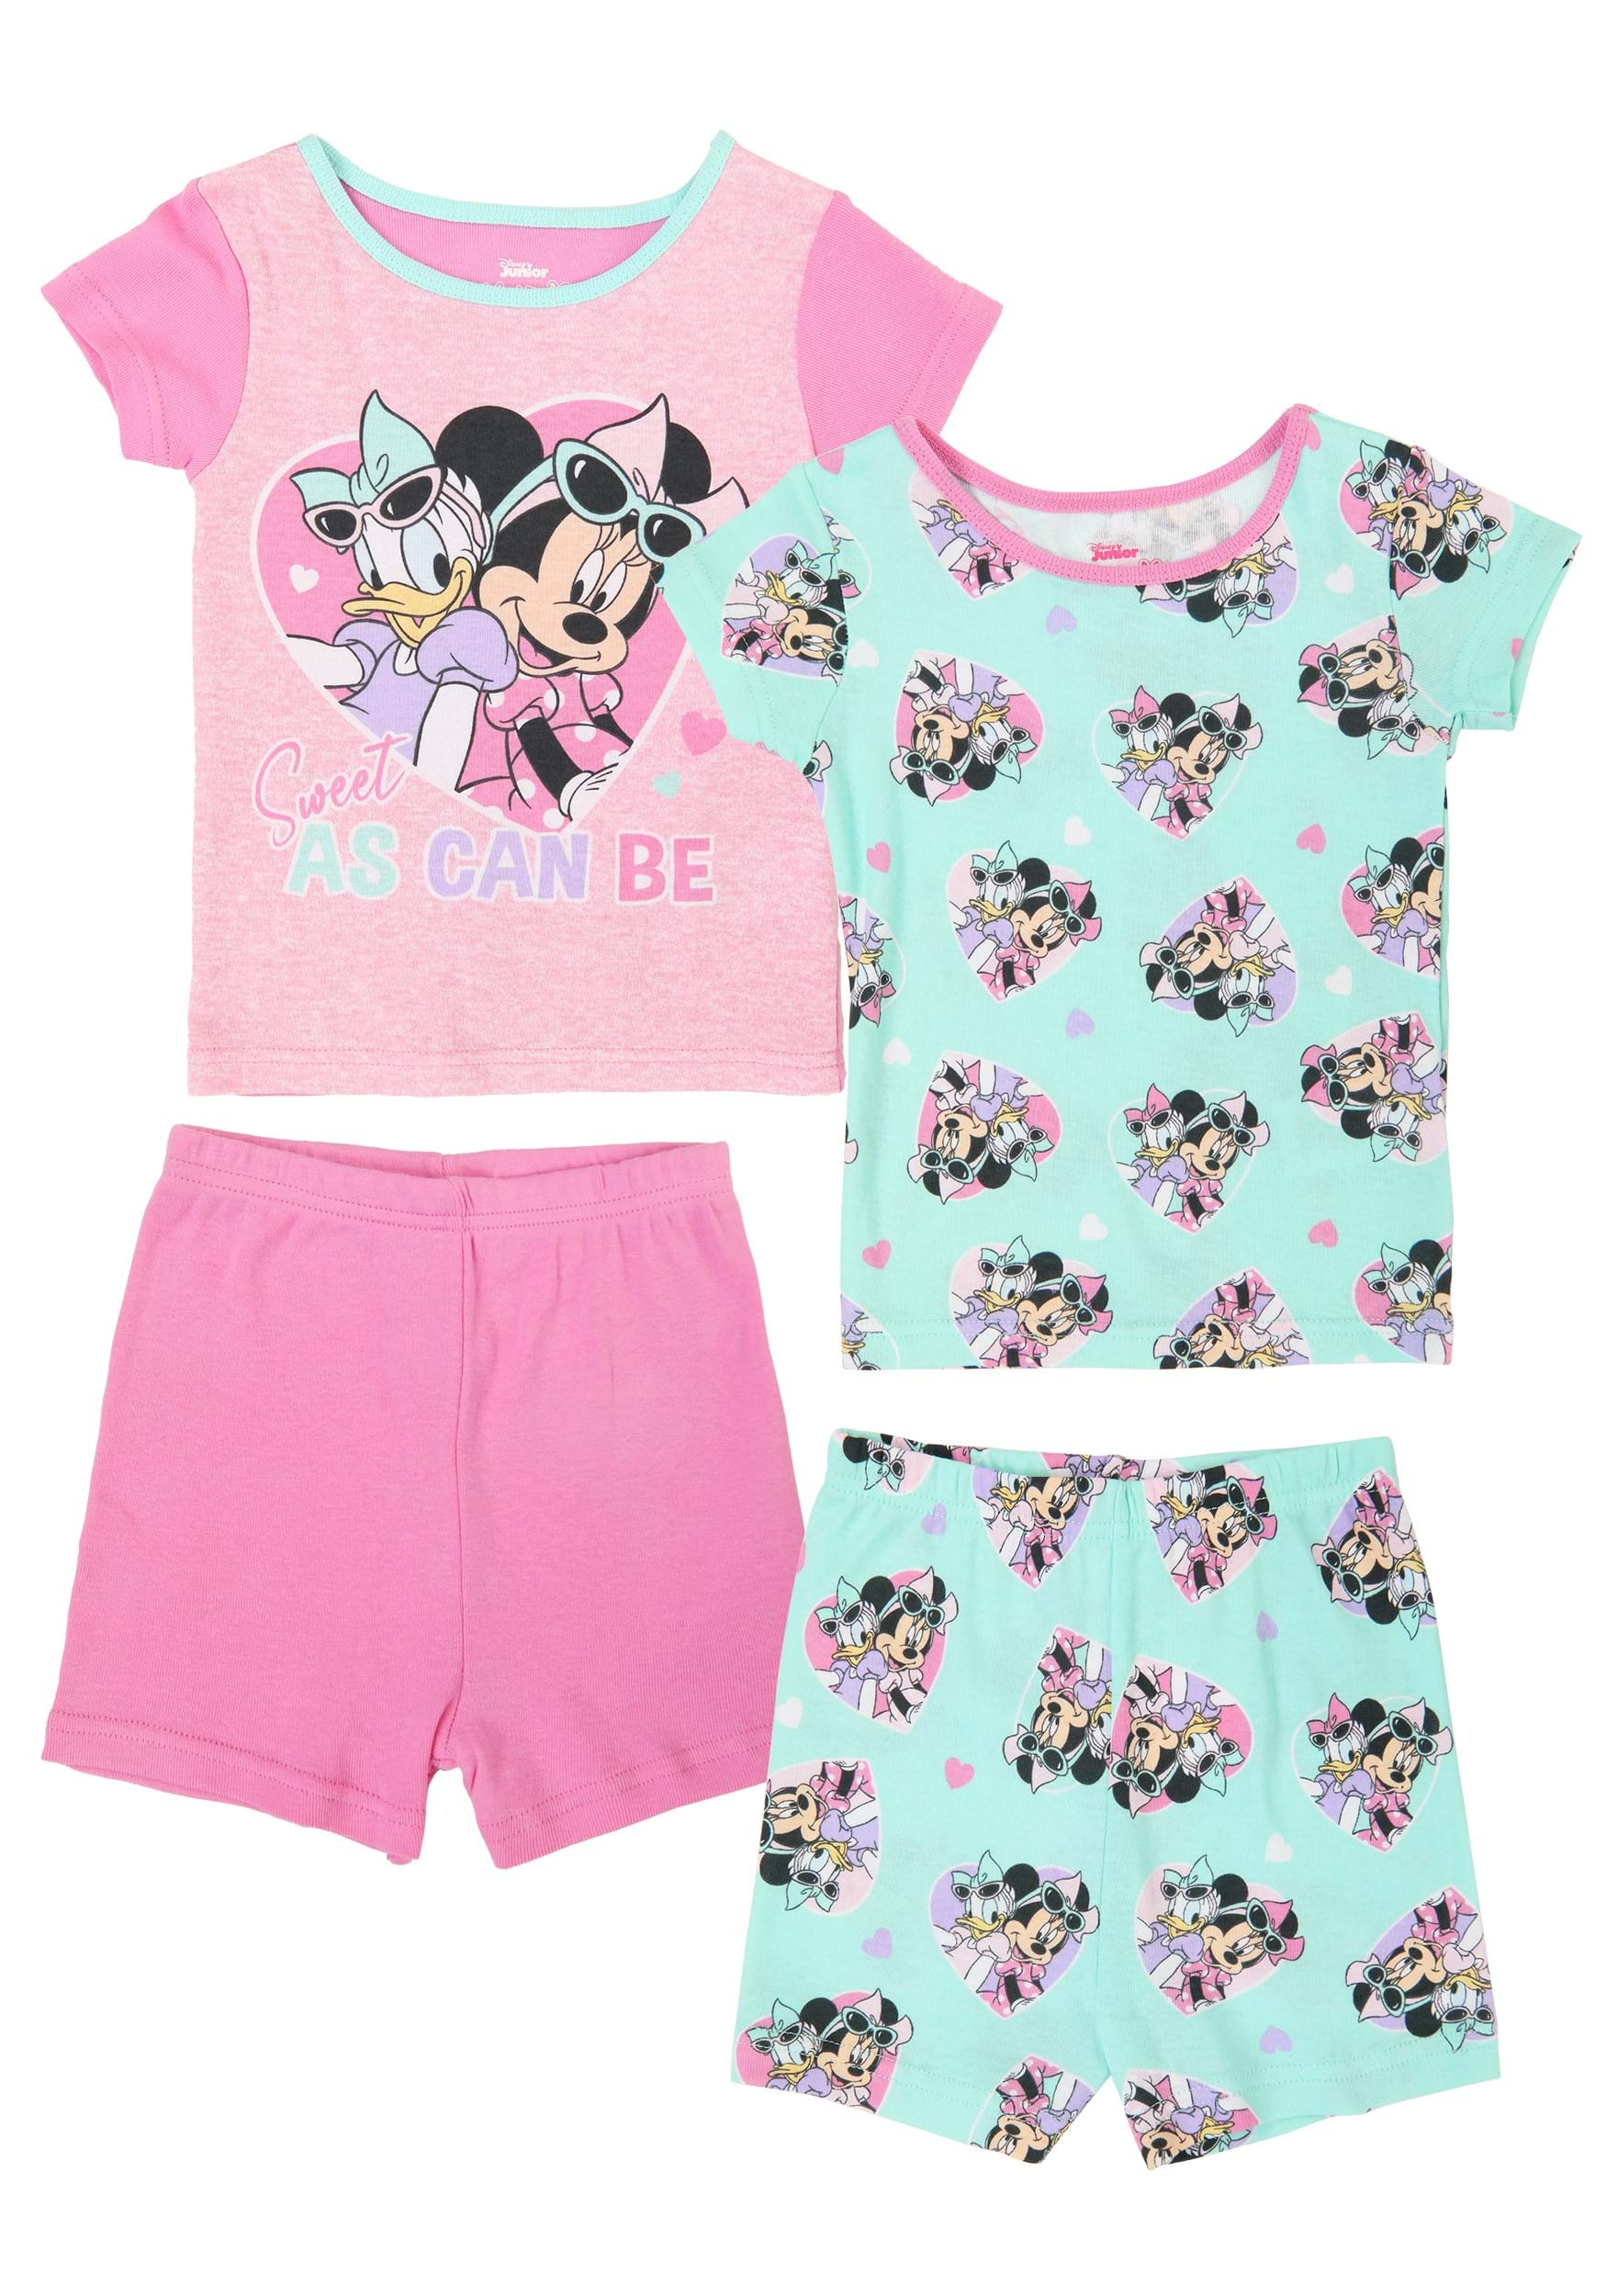 Minnie and Daisy 4 Piece Short Sleep Set for Toddlers